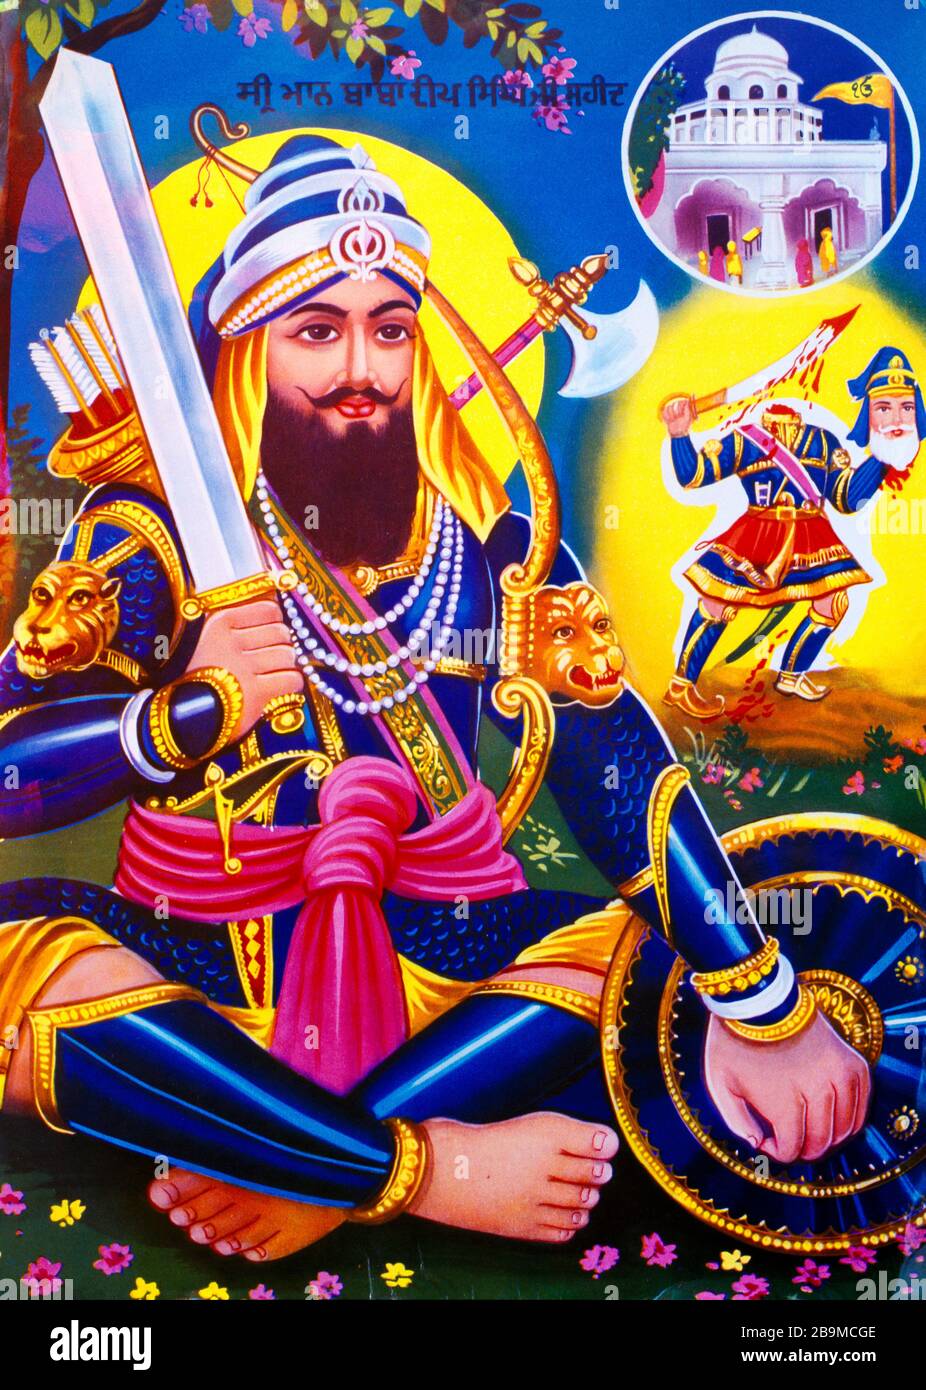 Baba Deep Singh ji Pictures, Photos, Wallpapers, Images Download (5) -  Religious Wallpaper, Hindu God Pictures, Free HD Hindu God Images Download,  Indian God Photos, Goddesses , Gurdwara, Temples in India, Historical